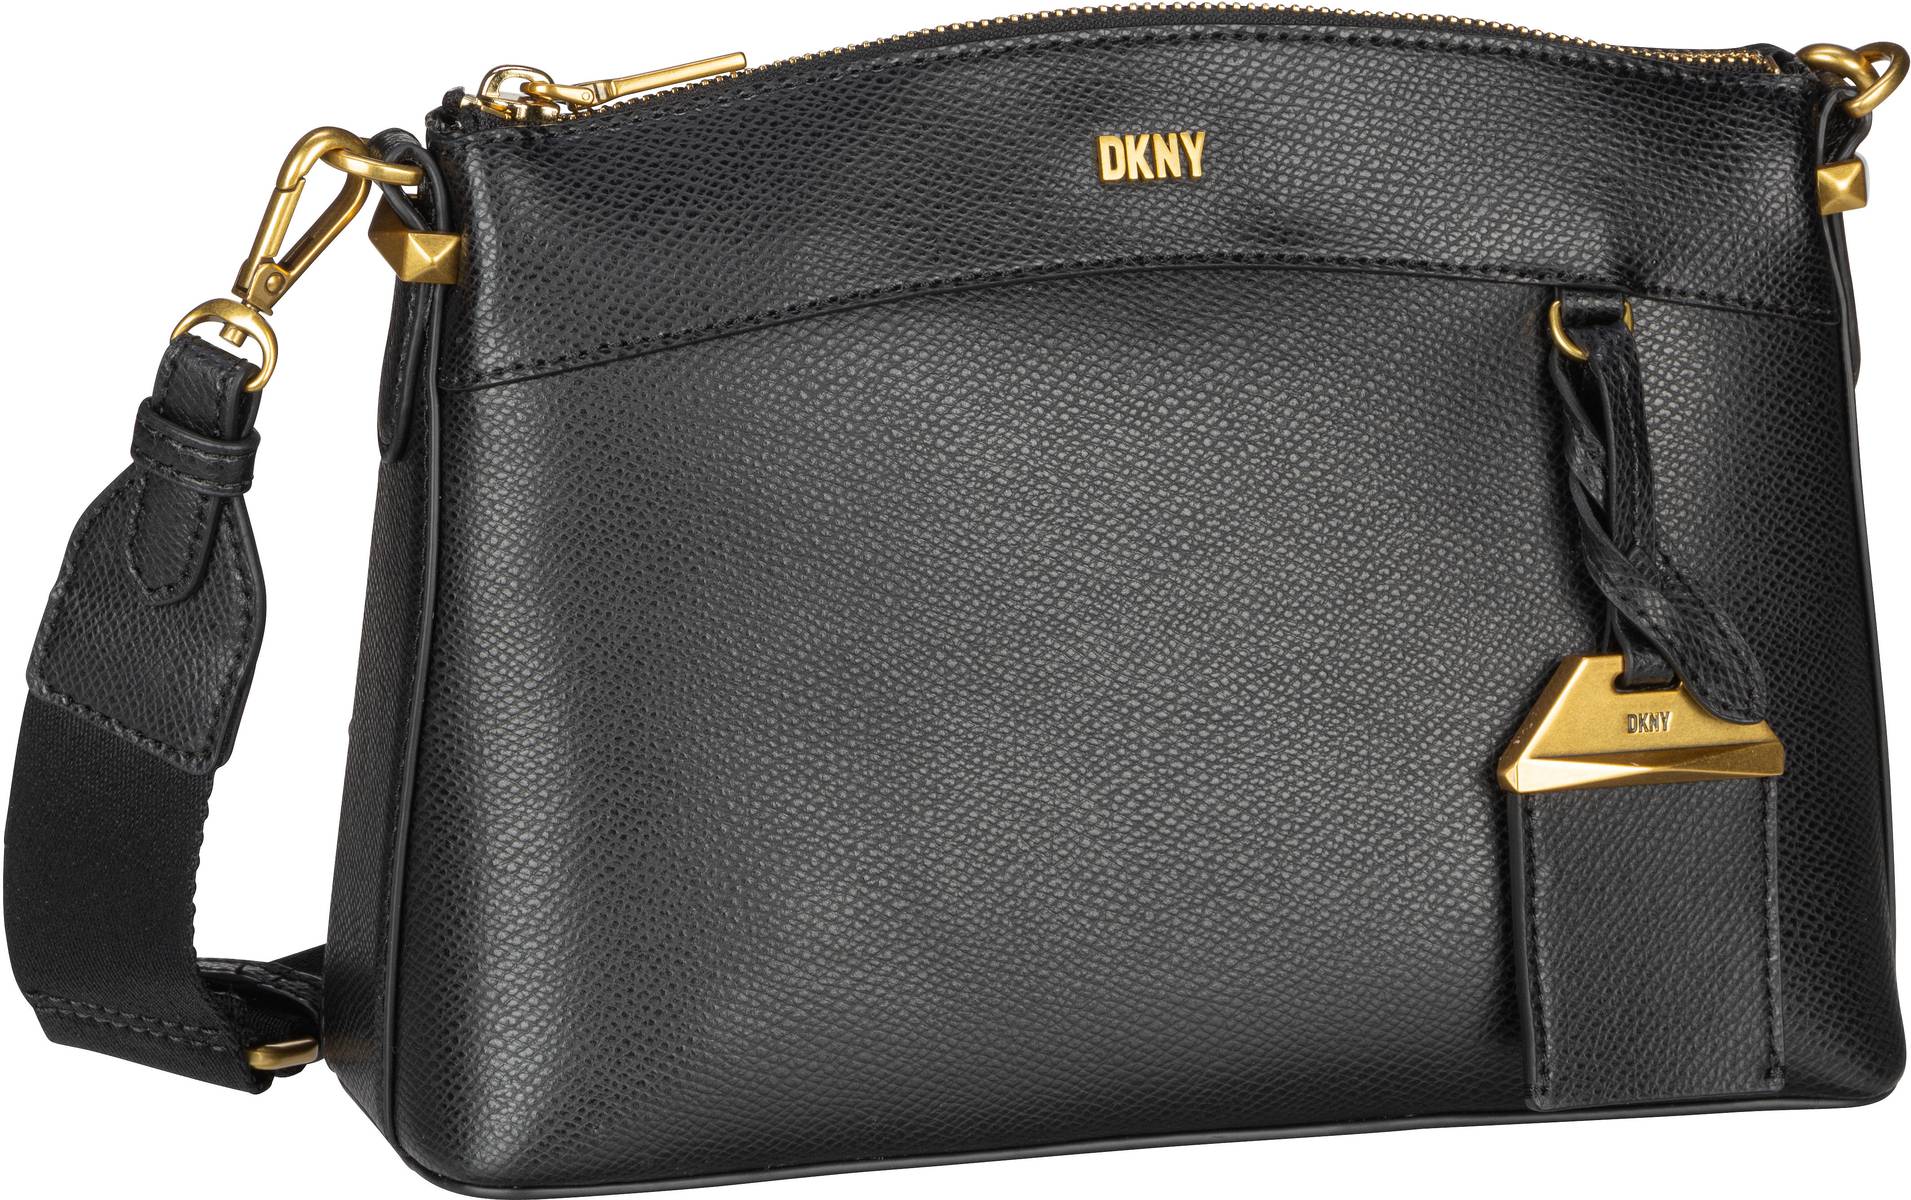 DKNY Marykate Dundee Leather Crossbody - Black/Gold